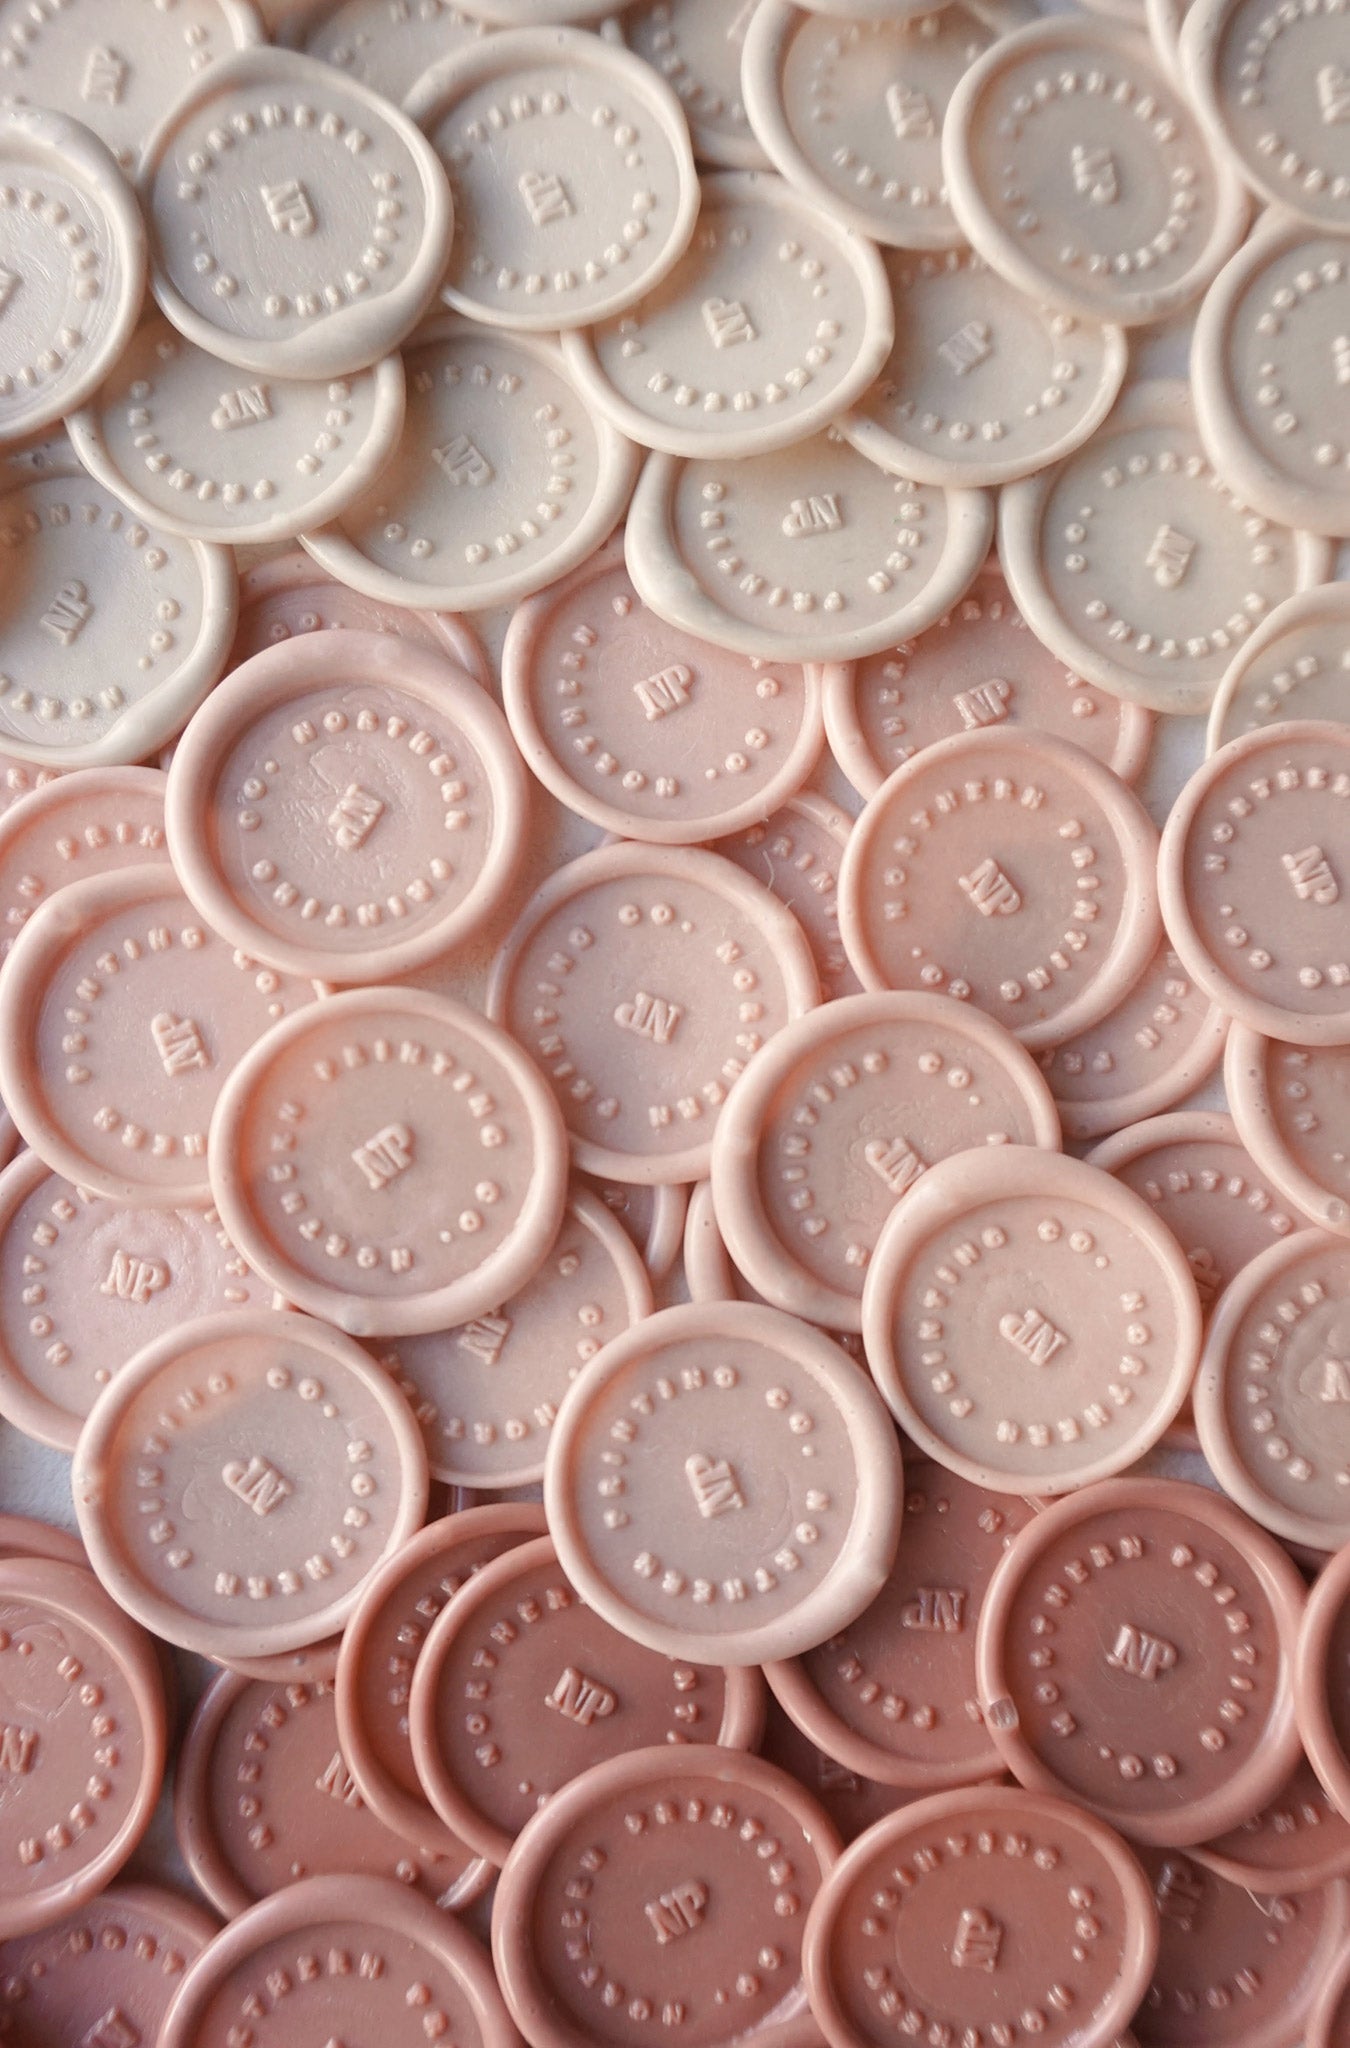 Various shades of pink wax seal stamps